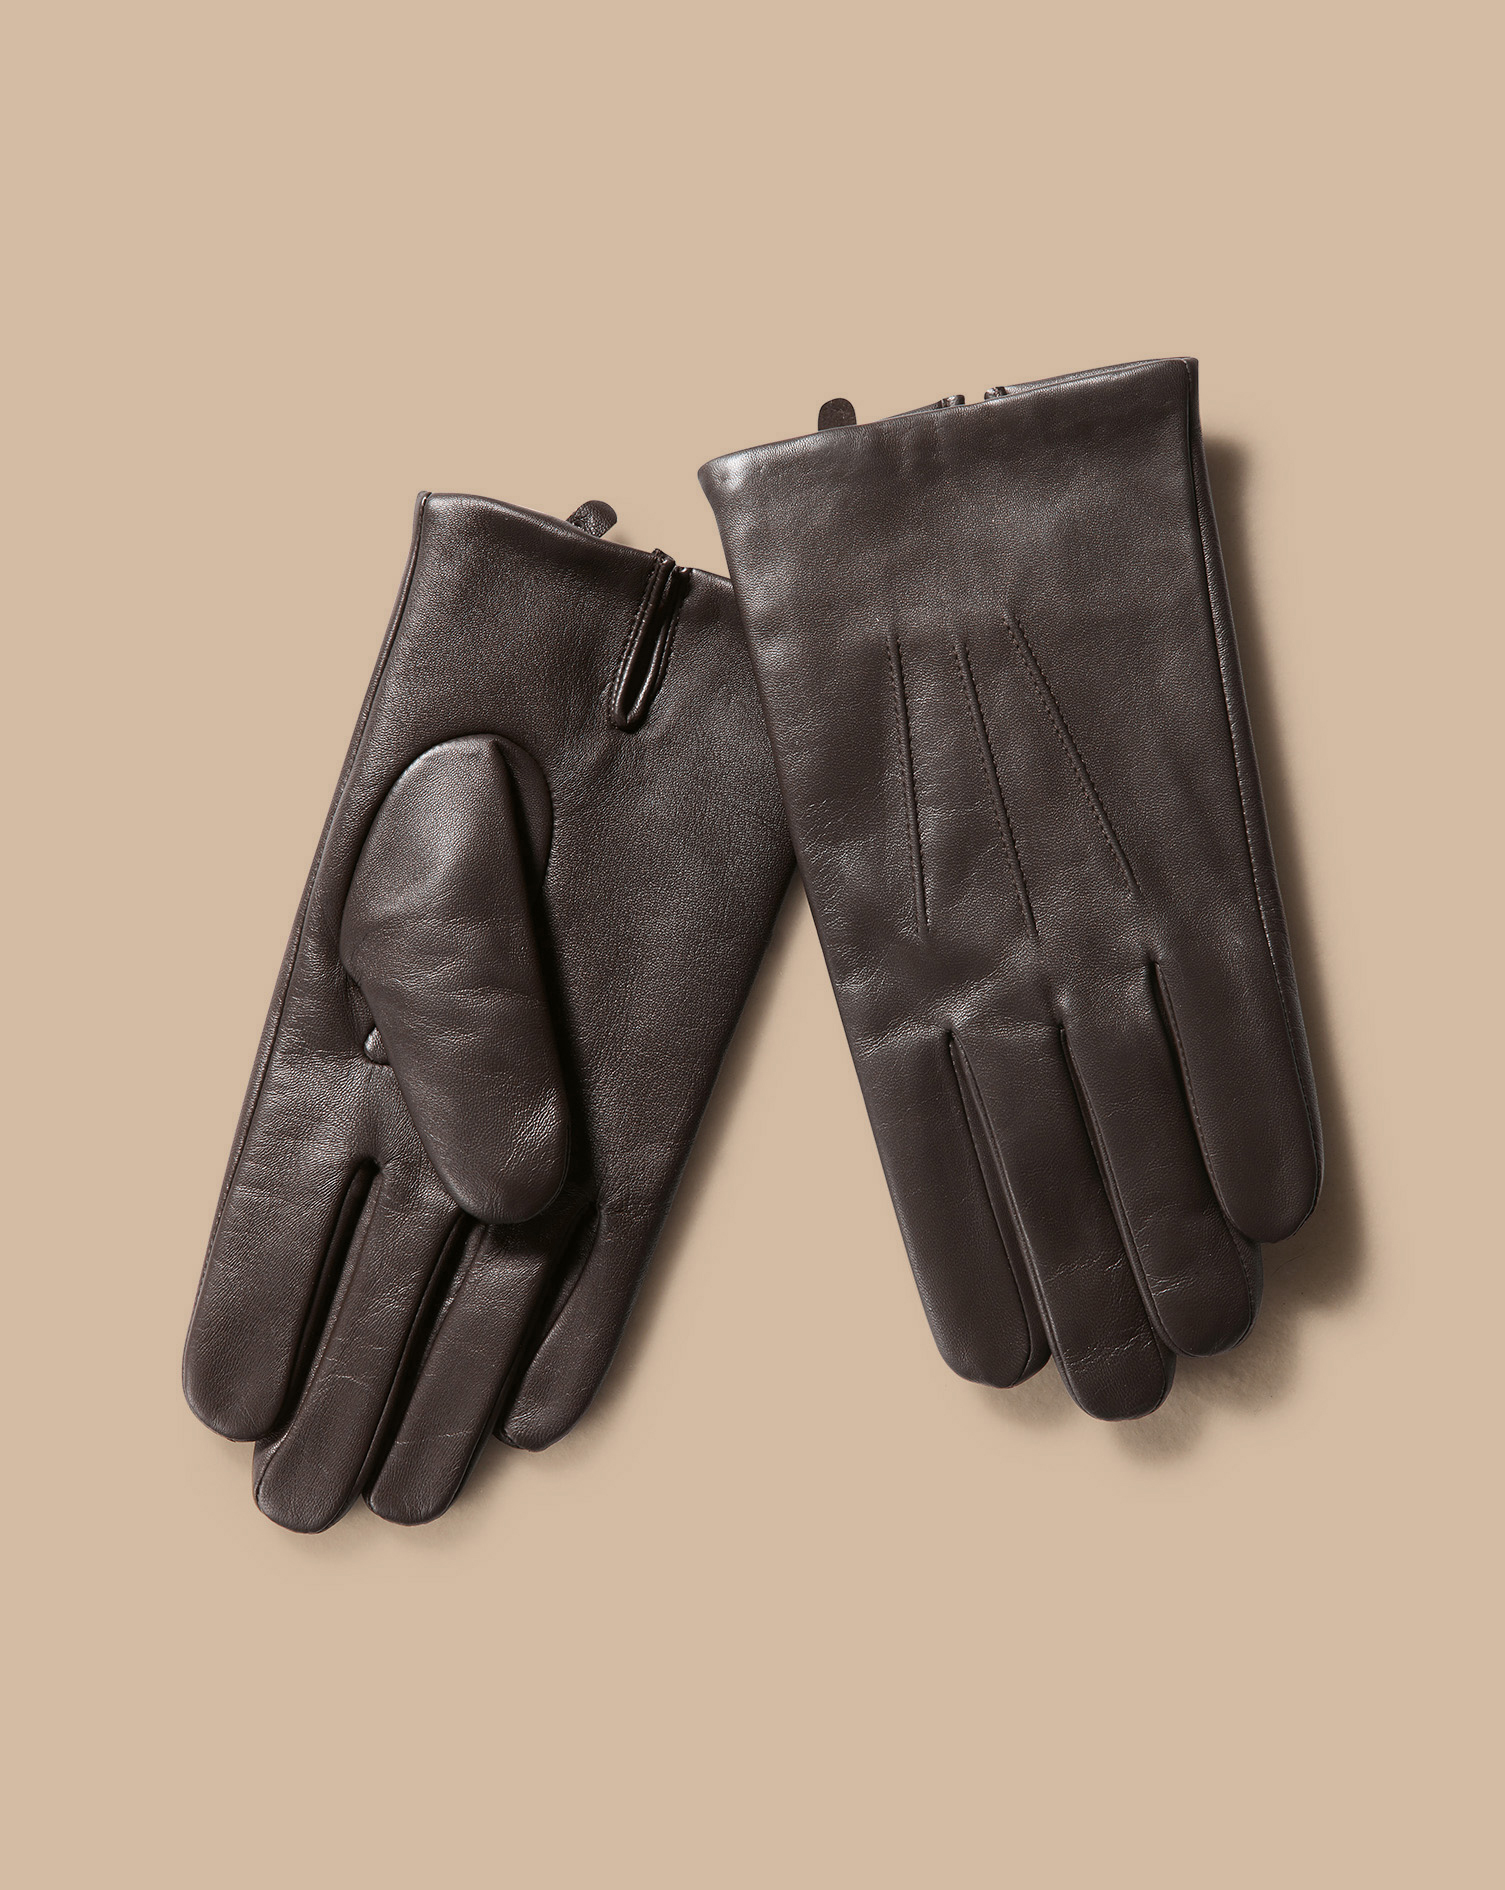 Men's Charles Tyrwhitt Touch Screen Gloves - Dark Chocolate Brown Size Large Leather
